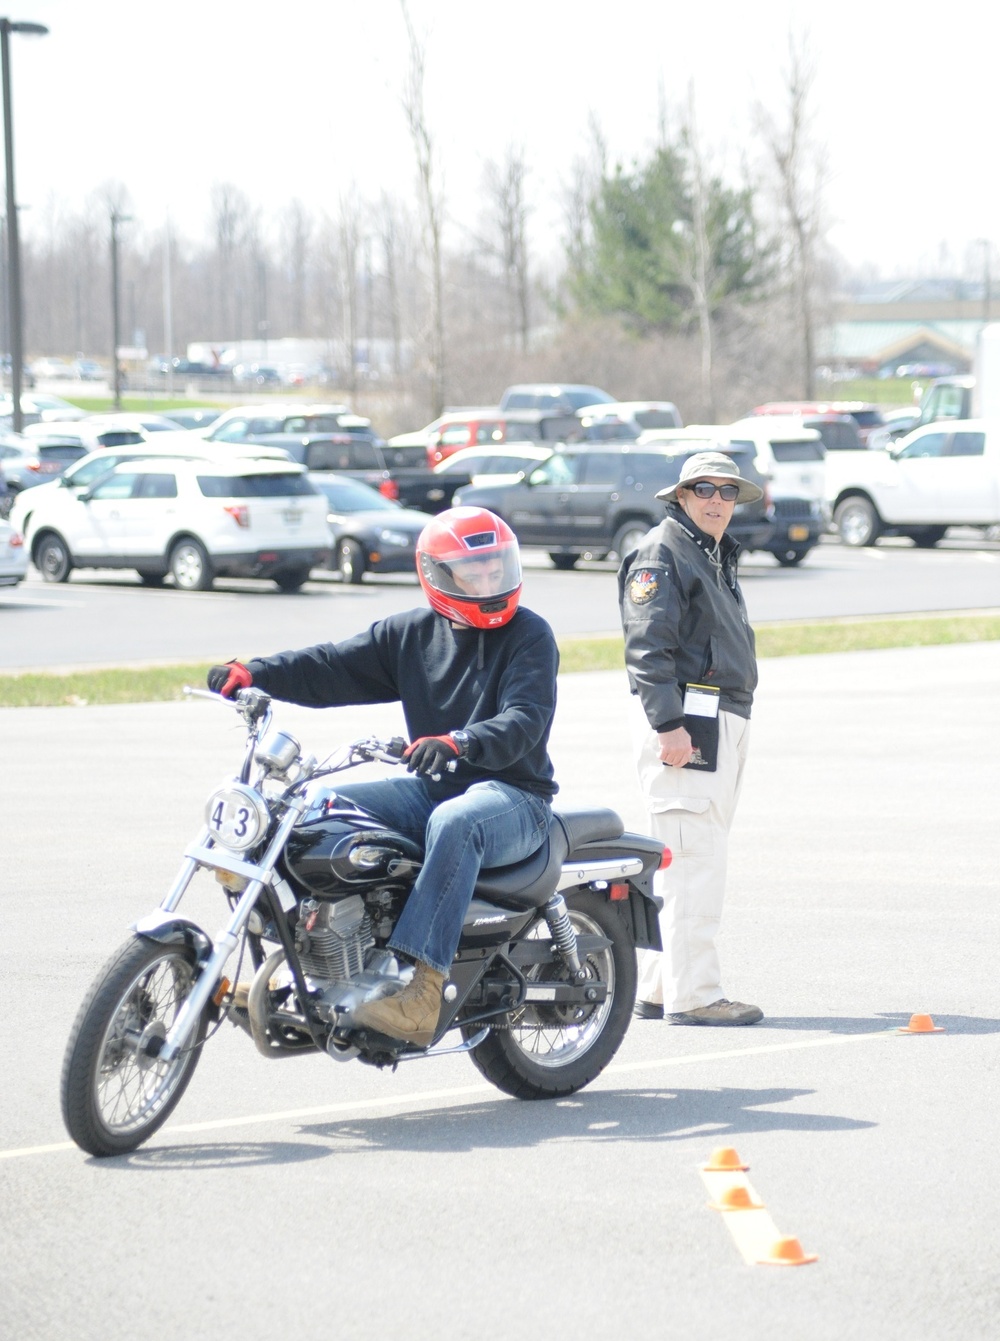 Motorcycle Safety Day set for May 6 at Fort Drum